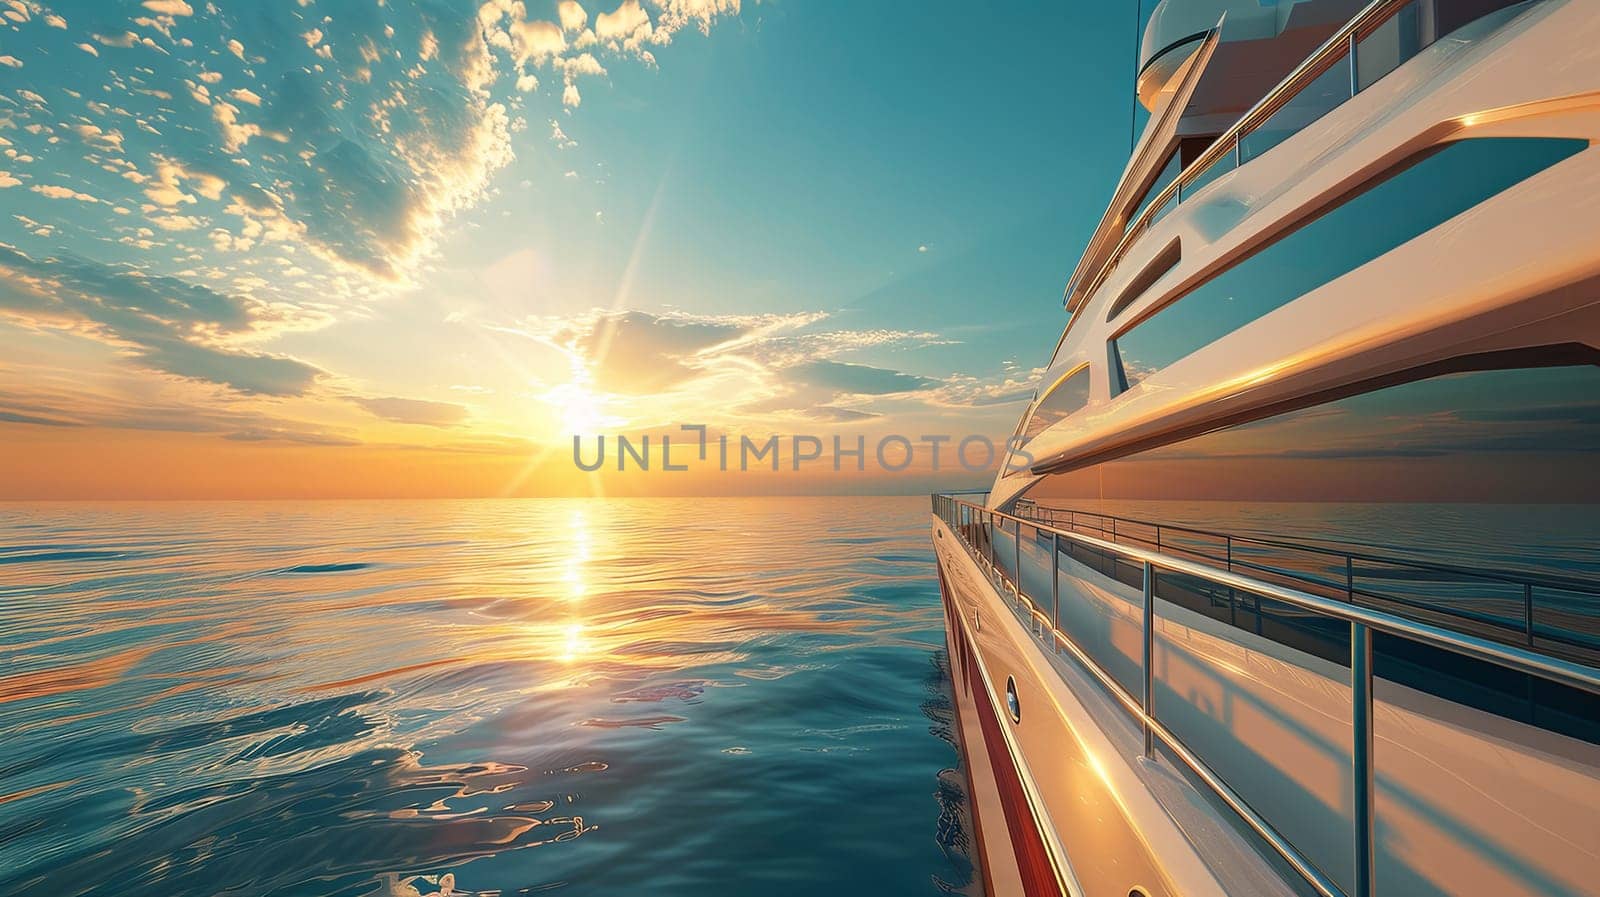 A luxurious yacht peacefully navigating through a quiet lagoon as the sun gracefully sets over the tranquil ocean horizon.